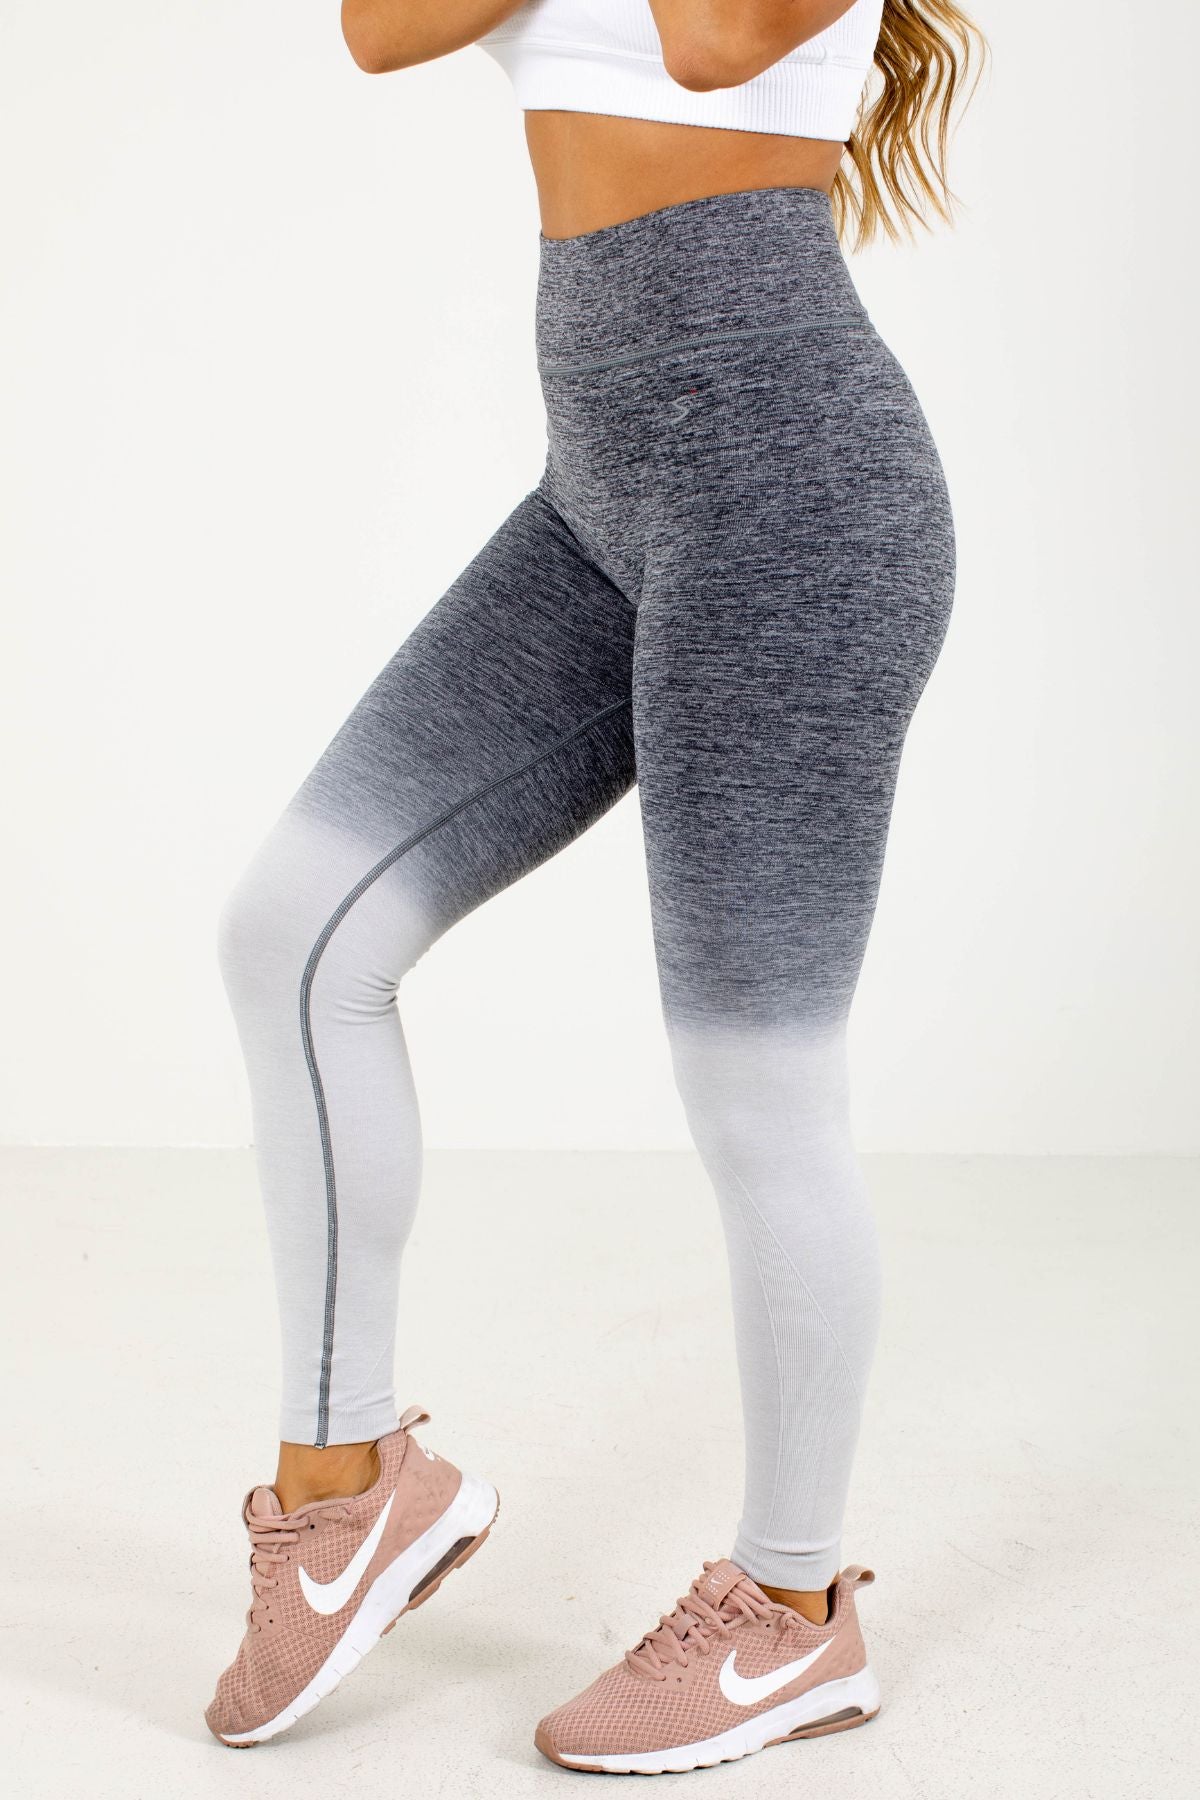 Women's Gray High-Waisted Boutique Activewear Leggings